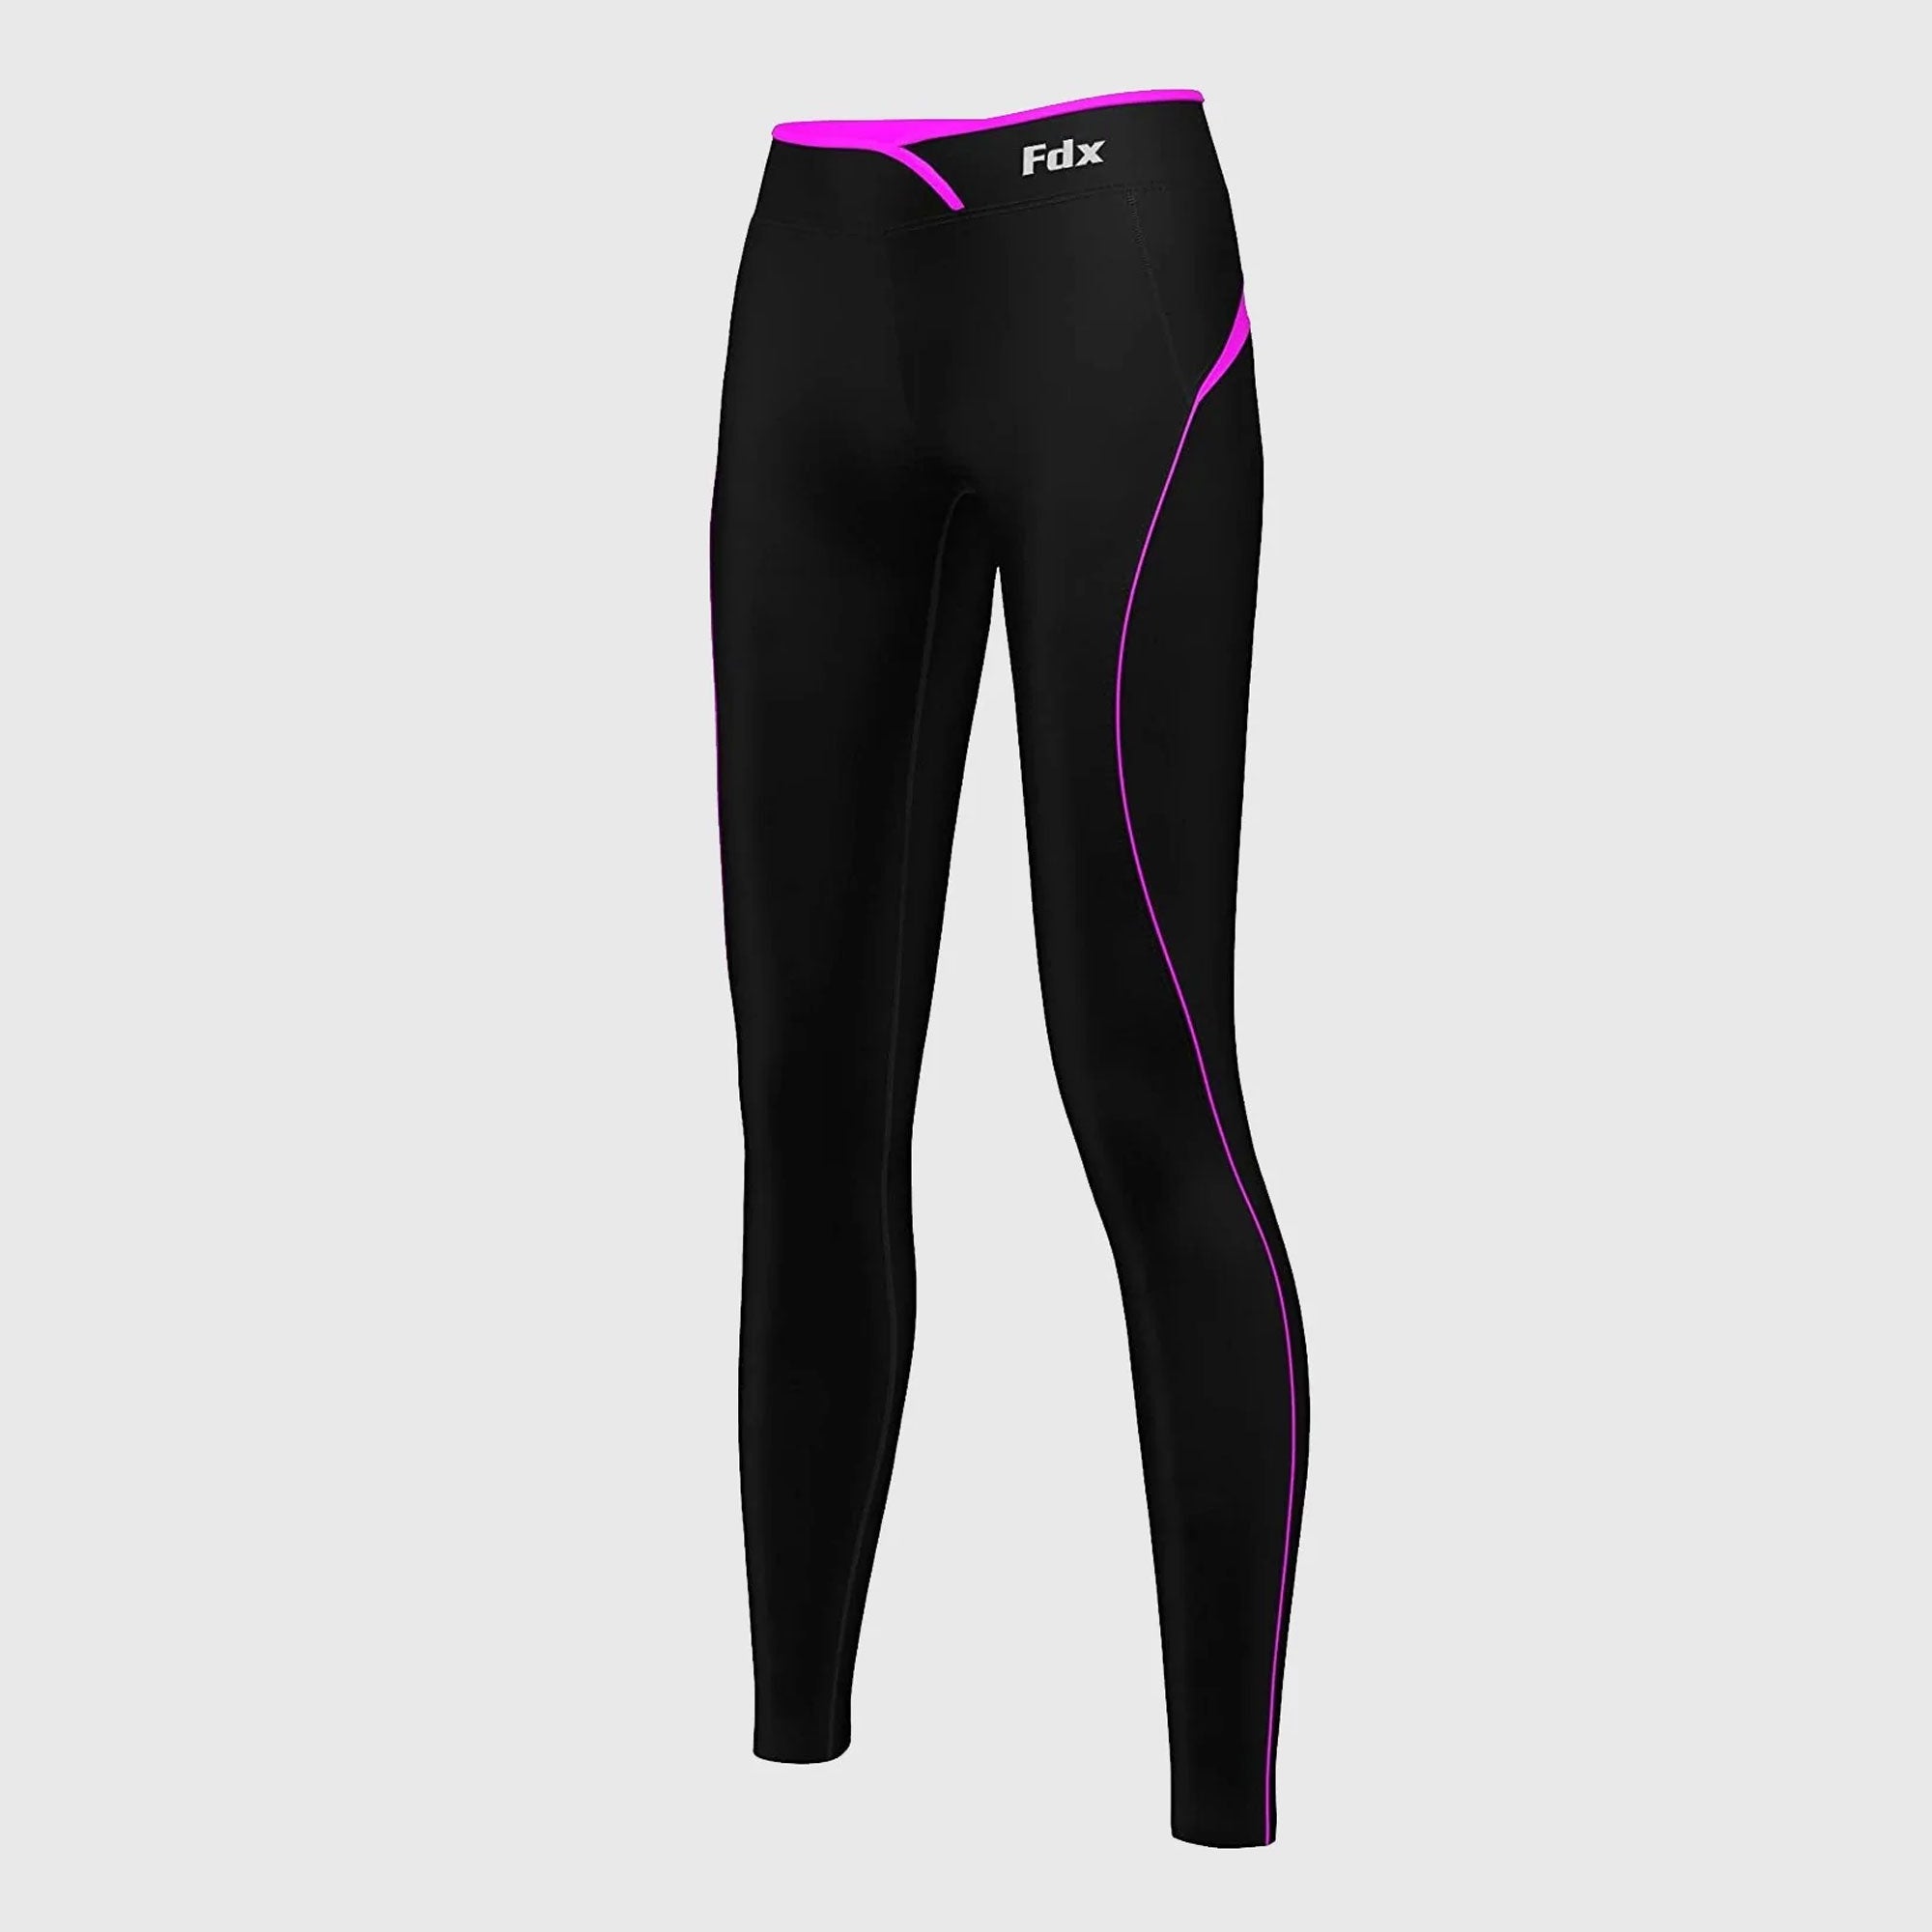 Fdx Amrap Women's Compression Running Tights Pink